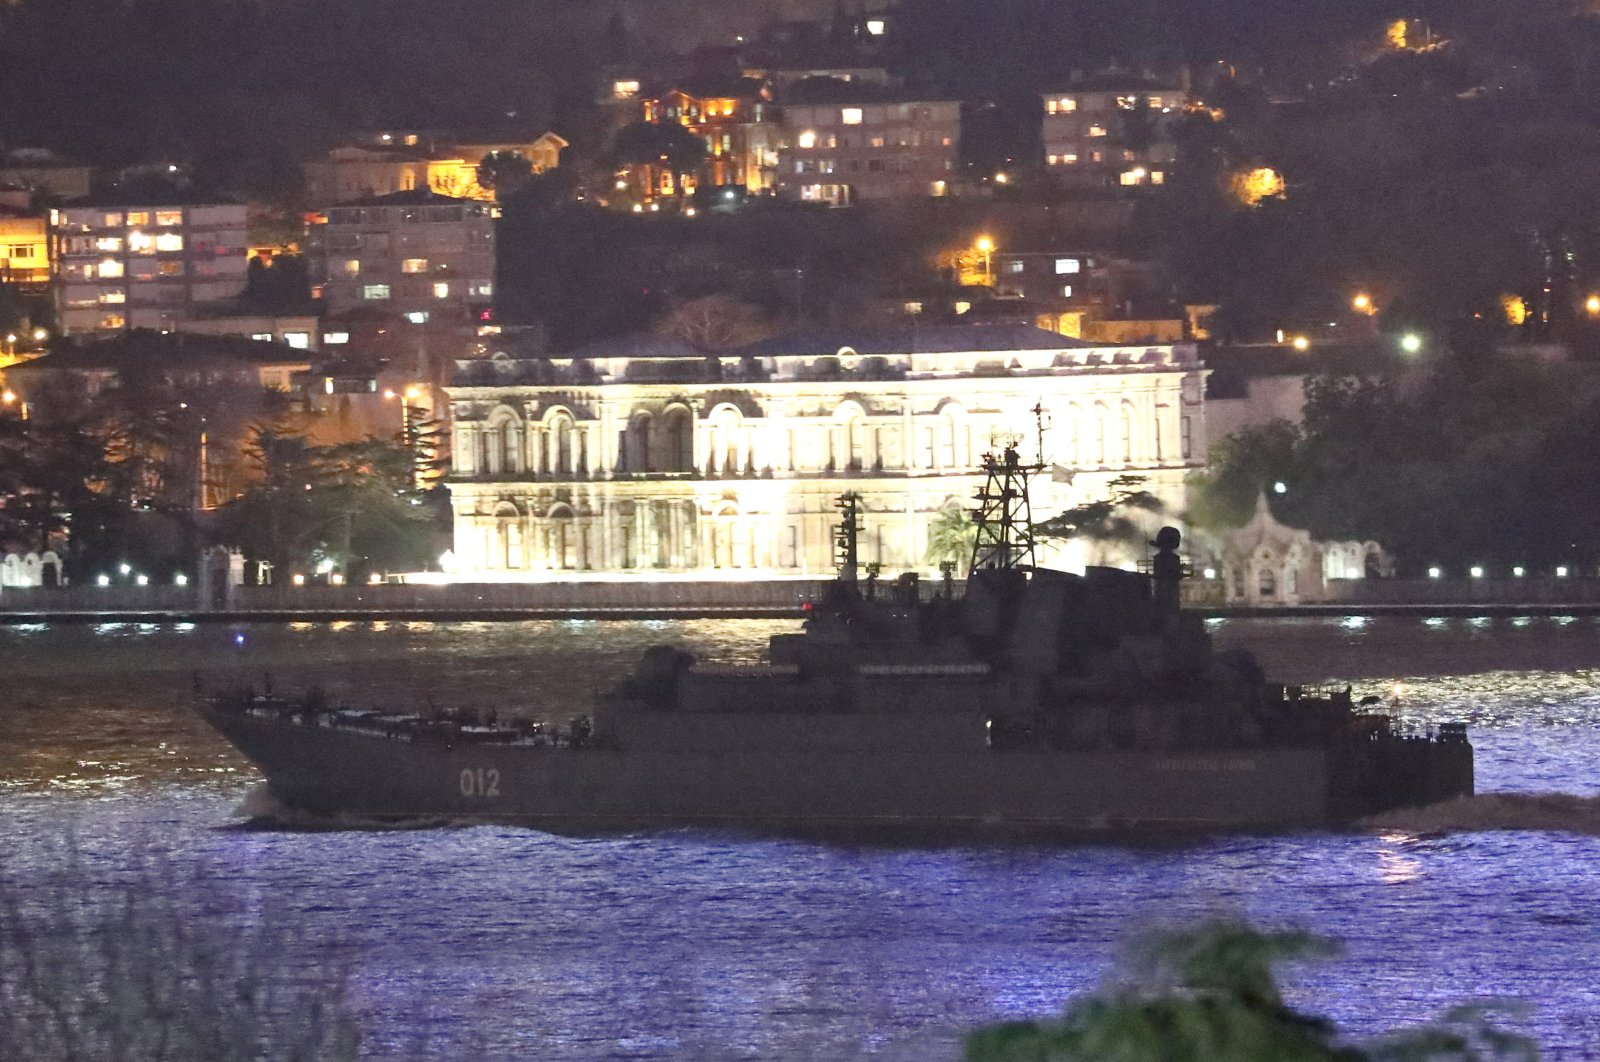 The Russian Navy&#039;s large landing ship Olenegorsky Gornyak sets sail in the Bosphorus, on its way to the Black Sea, in Istanbul, Turkey, Feb. 9, 2022. (REUTERS)